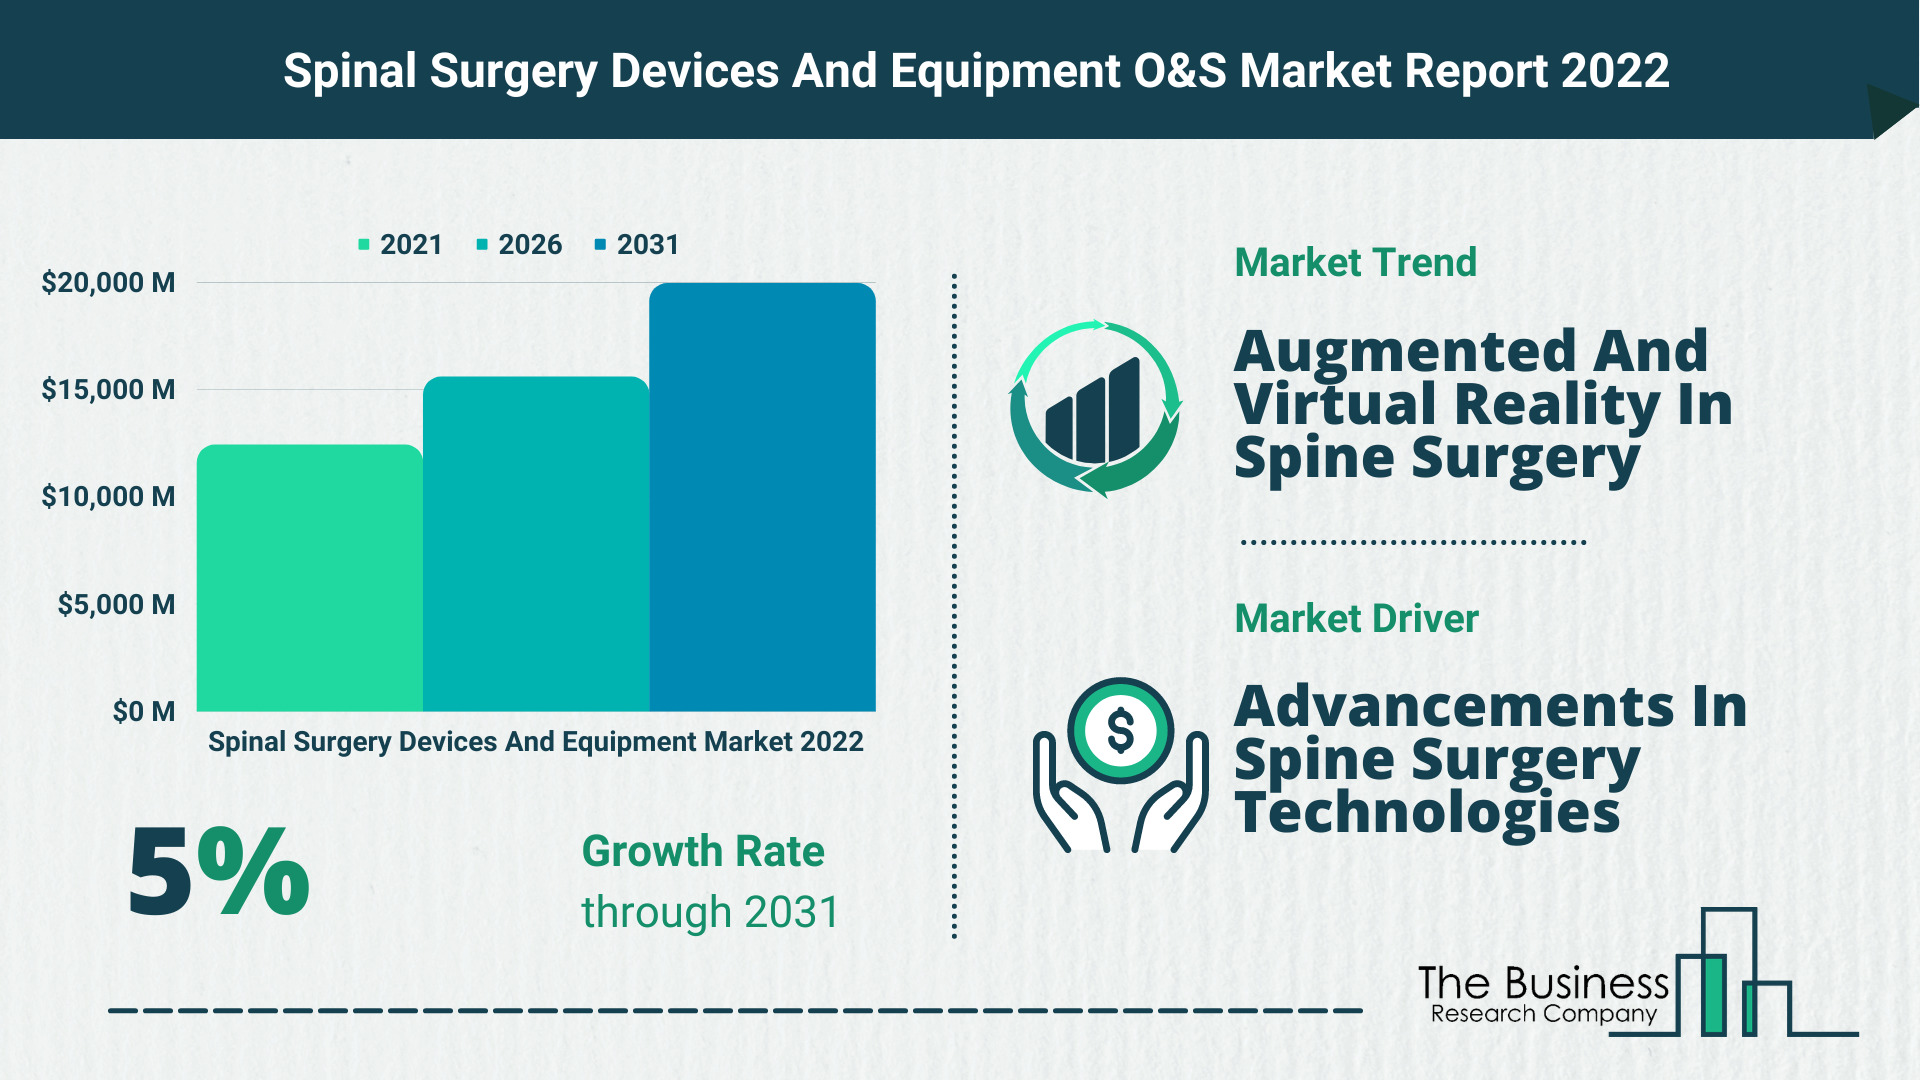 Key Opportunities And Strategies In The Spinal Surgery Devices And Equipment Market